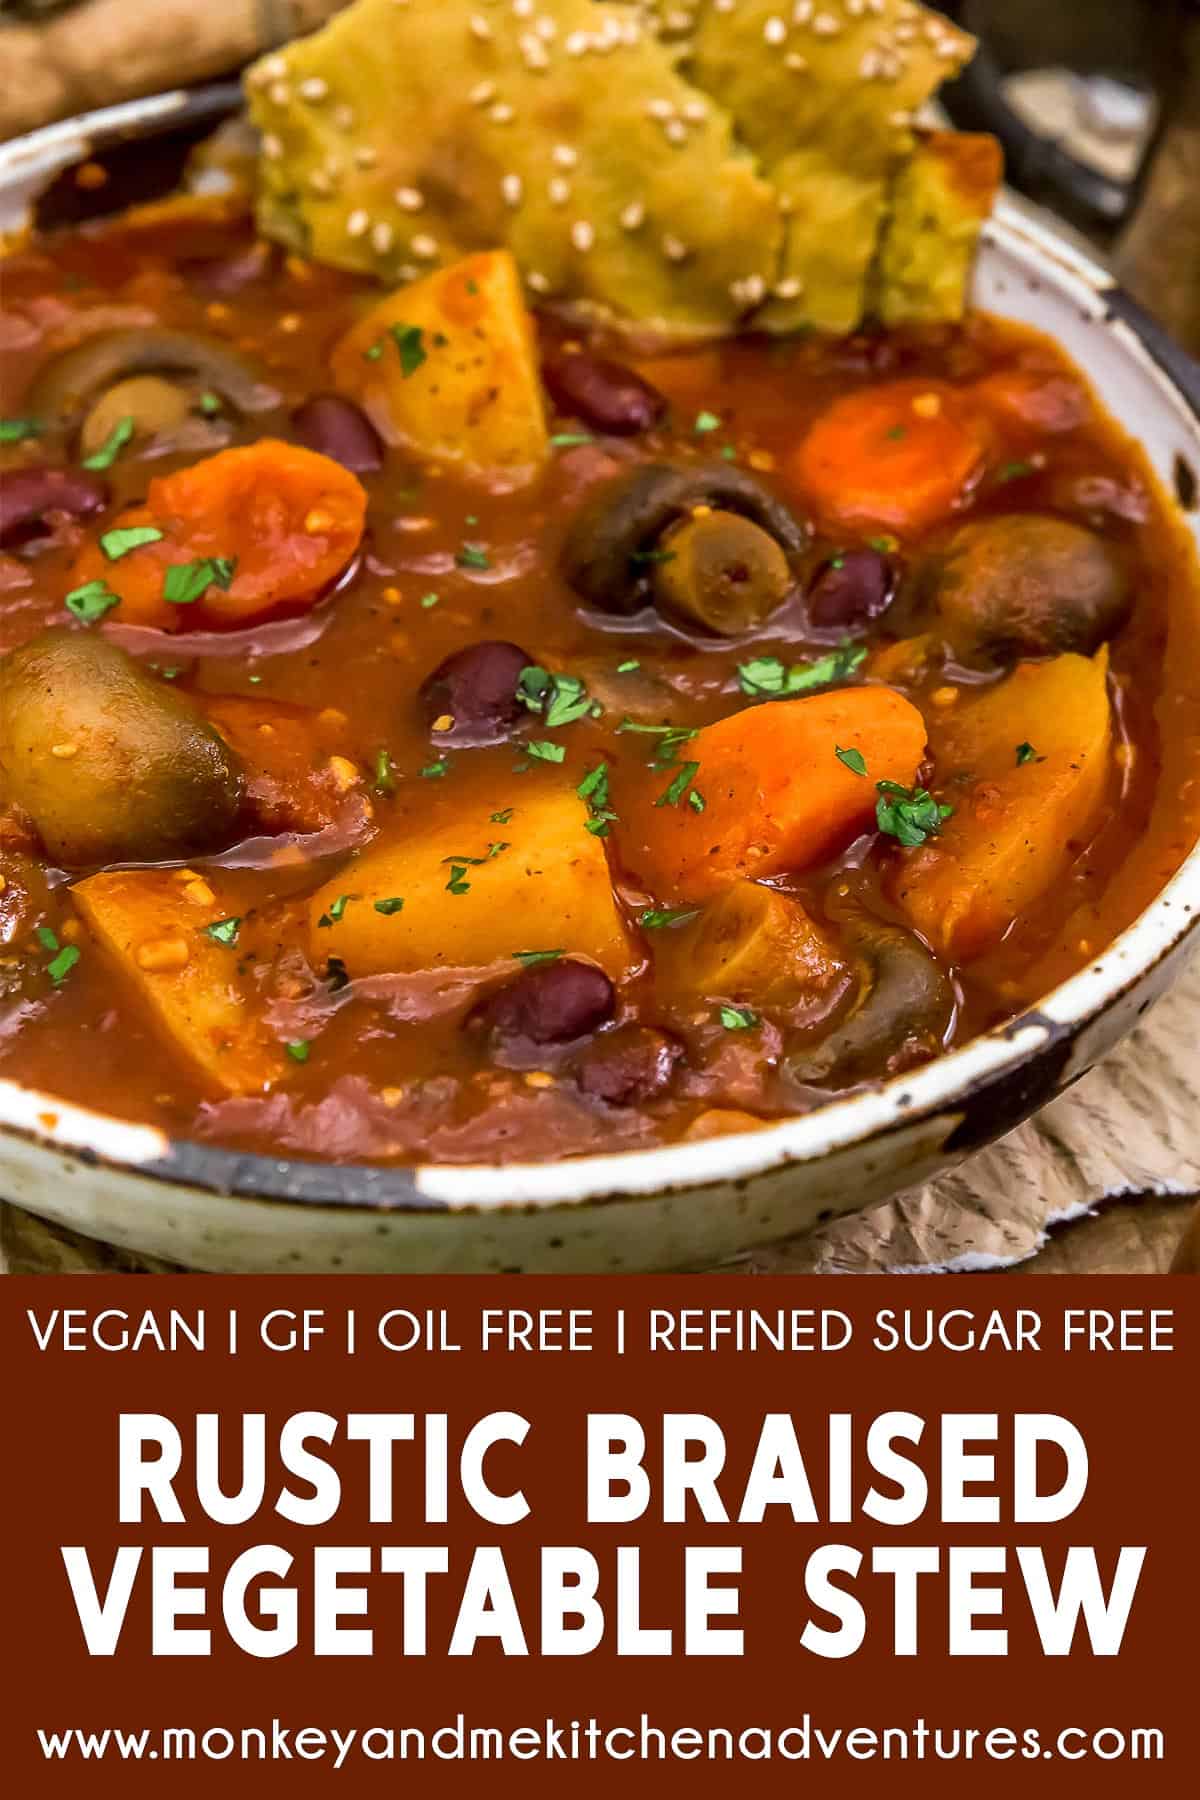 Rustic Braised Vegetable Stew with Text Description